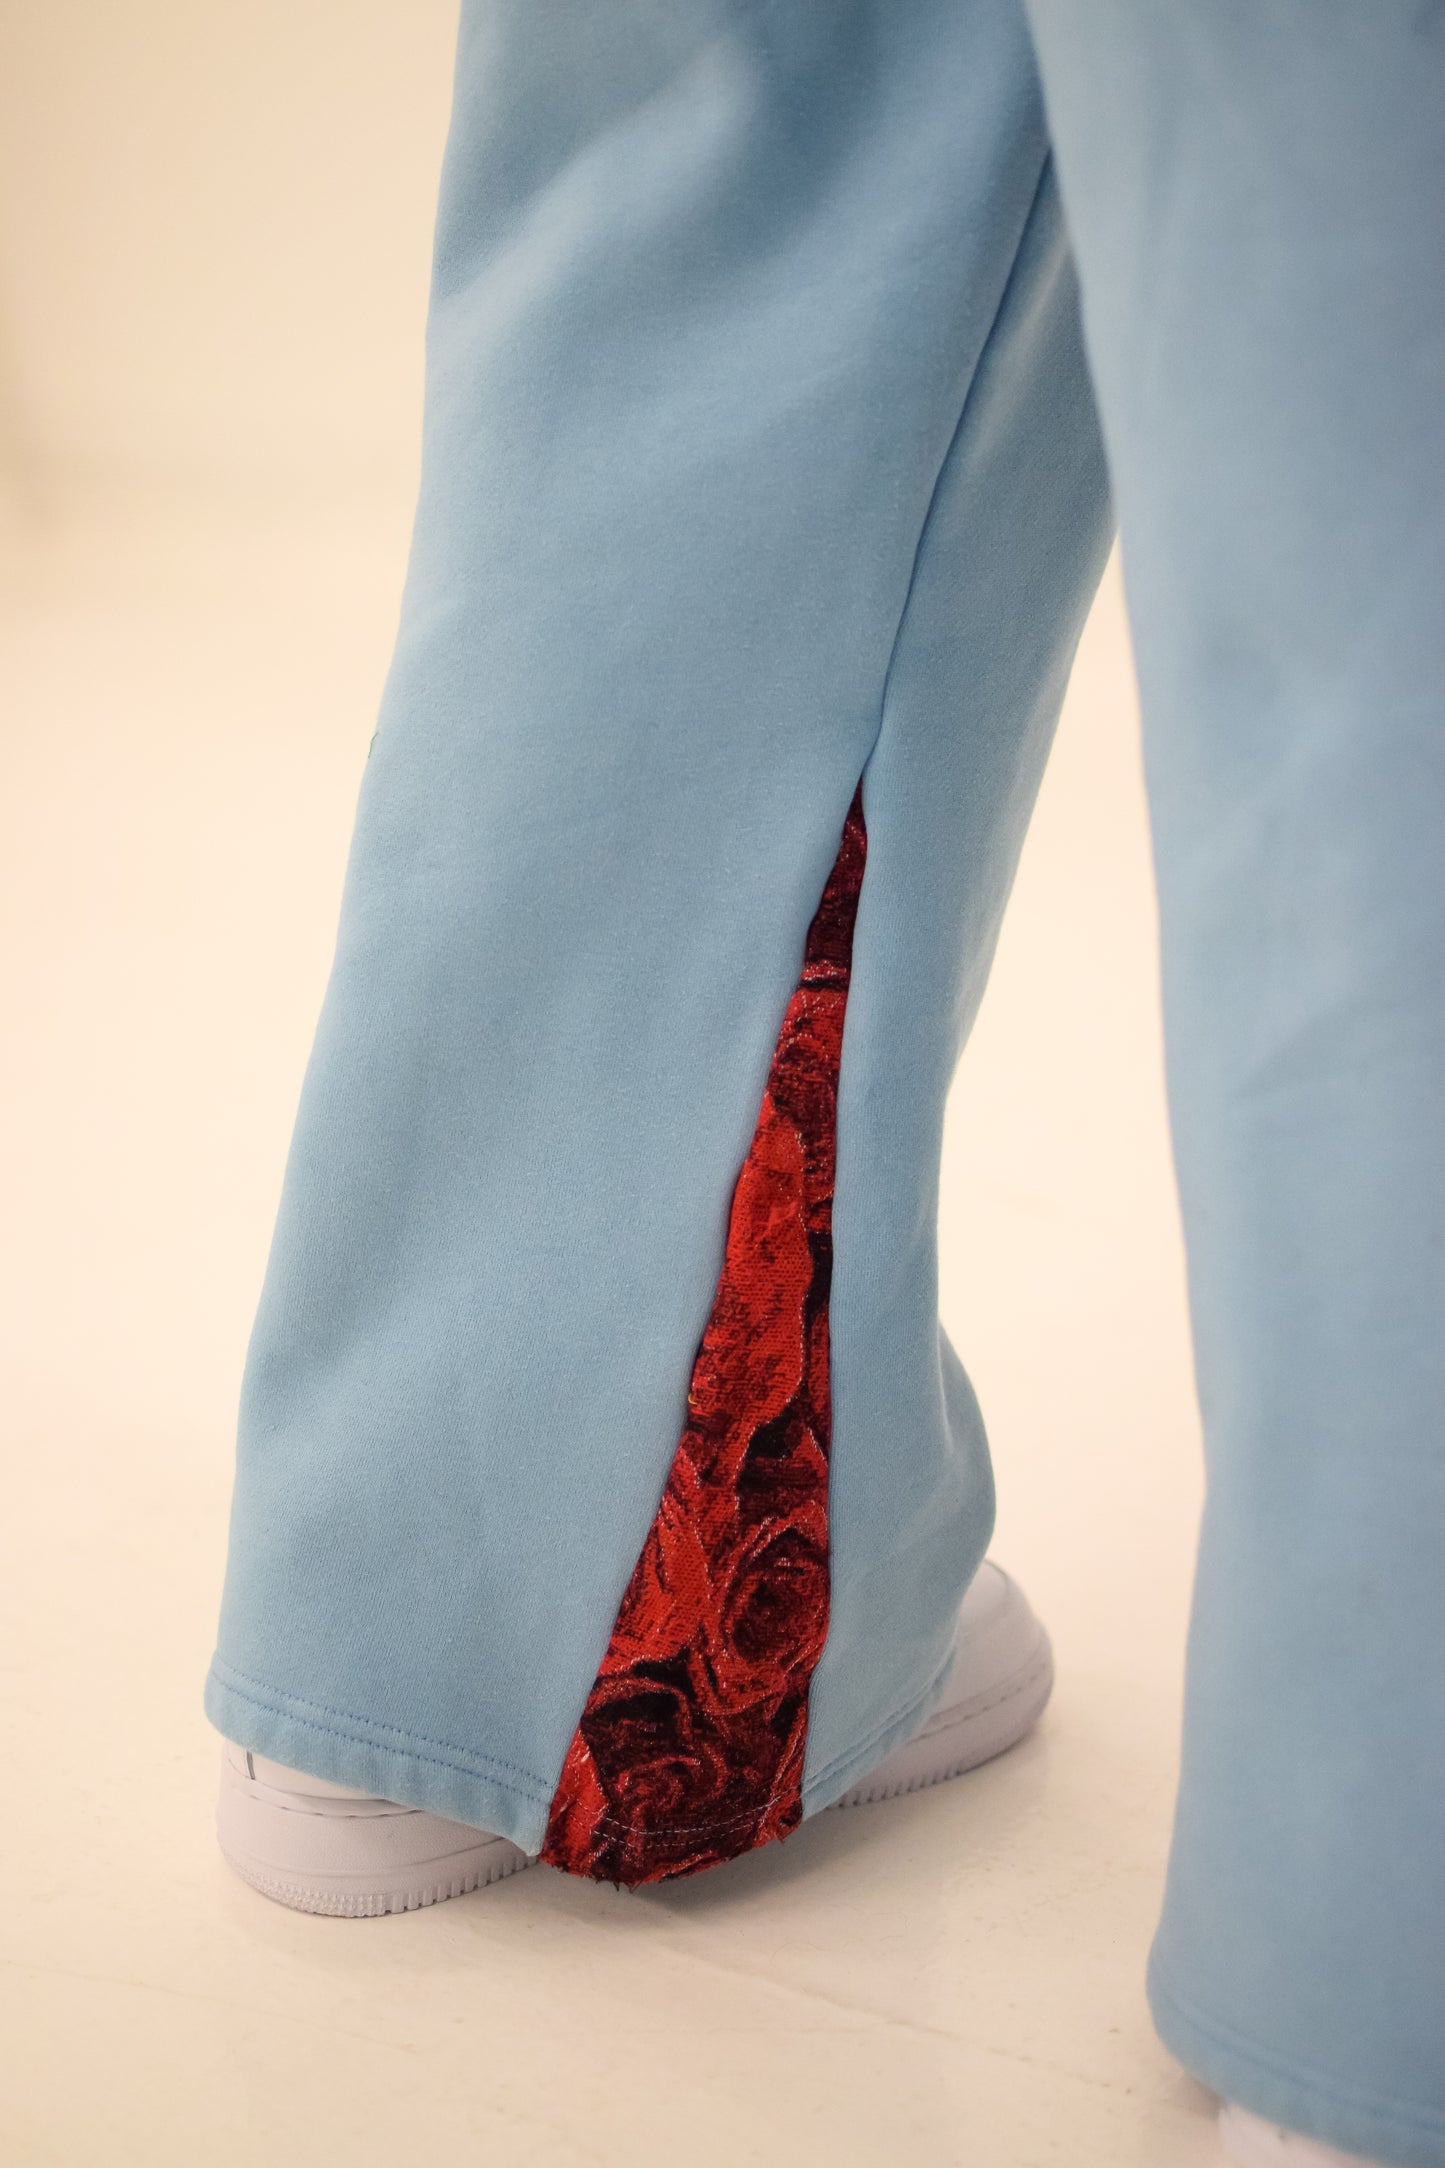 Chinchilla Living "Doves & Roses" Flare Sweatpants Red & Blue